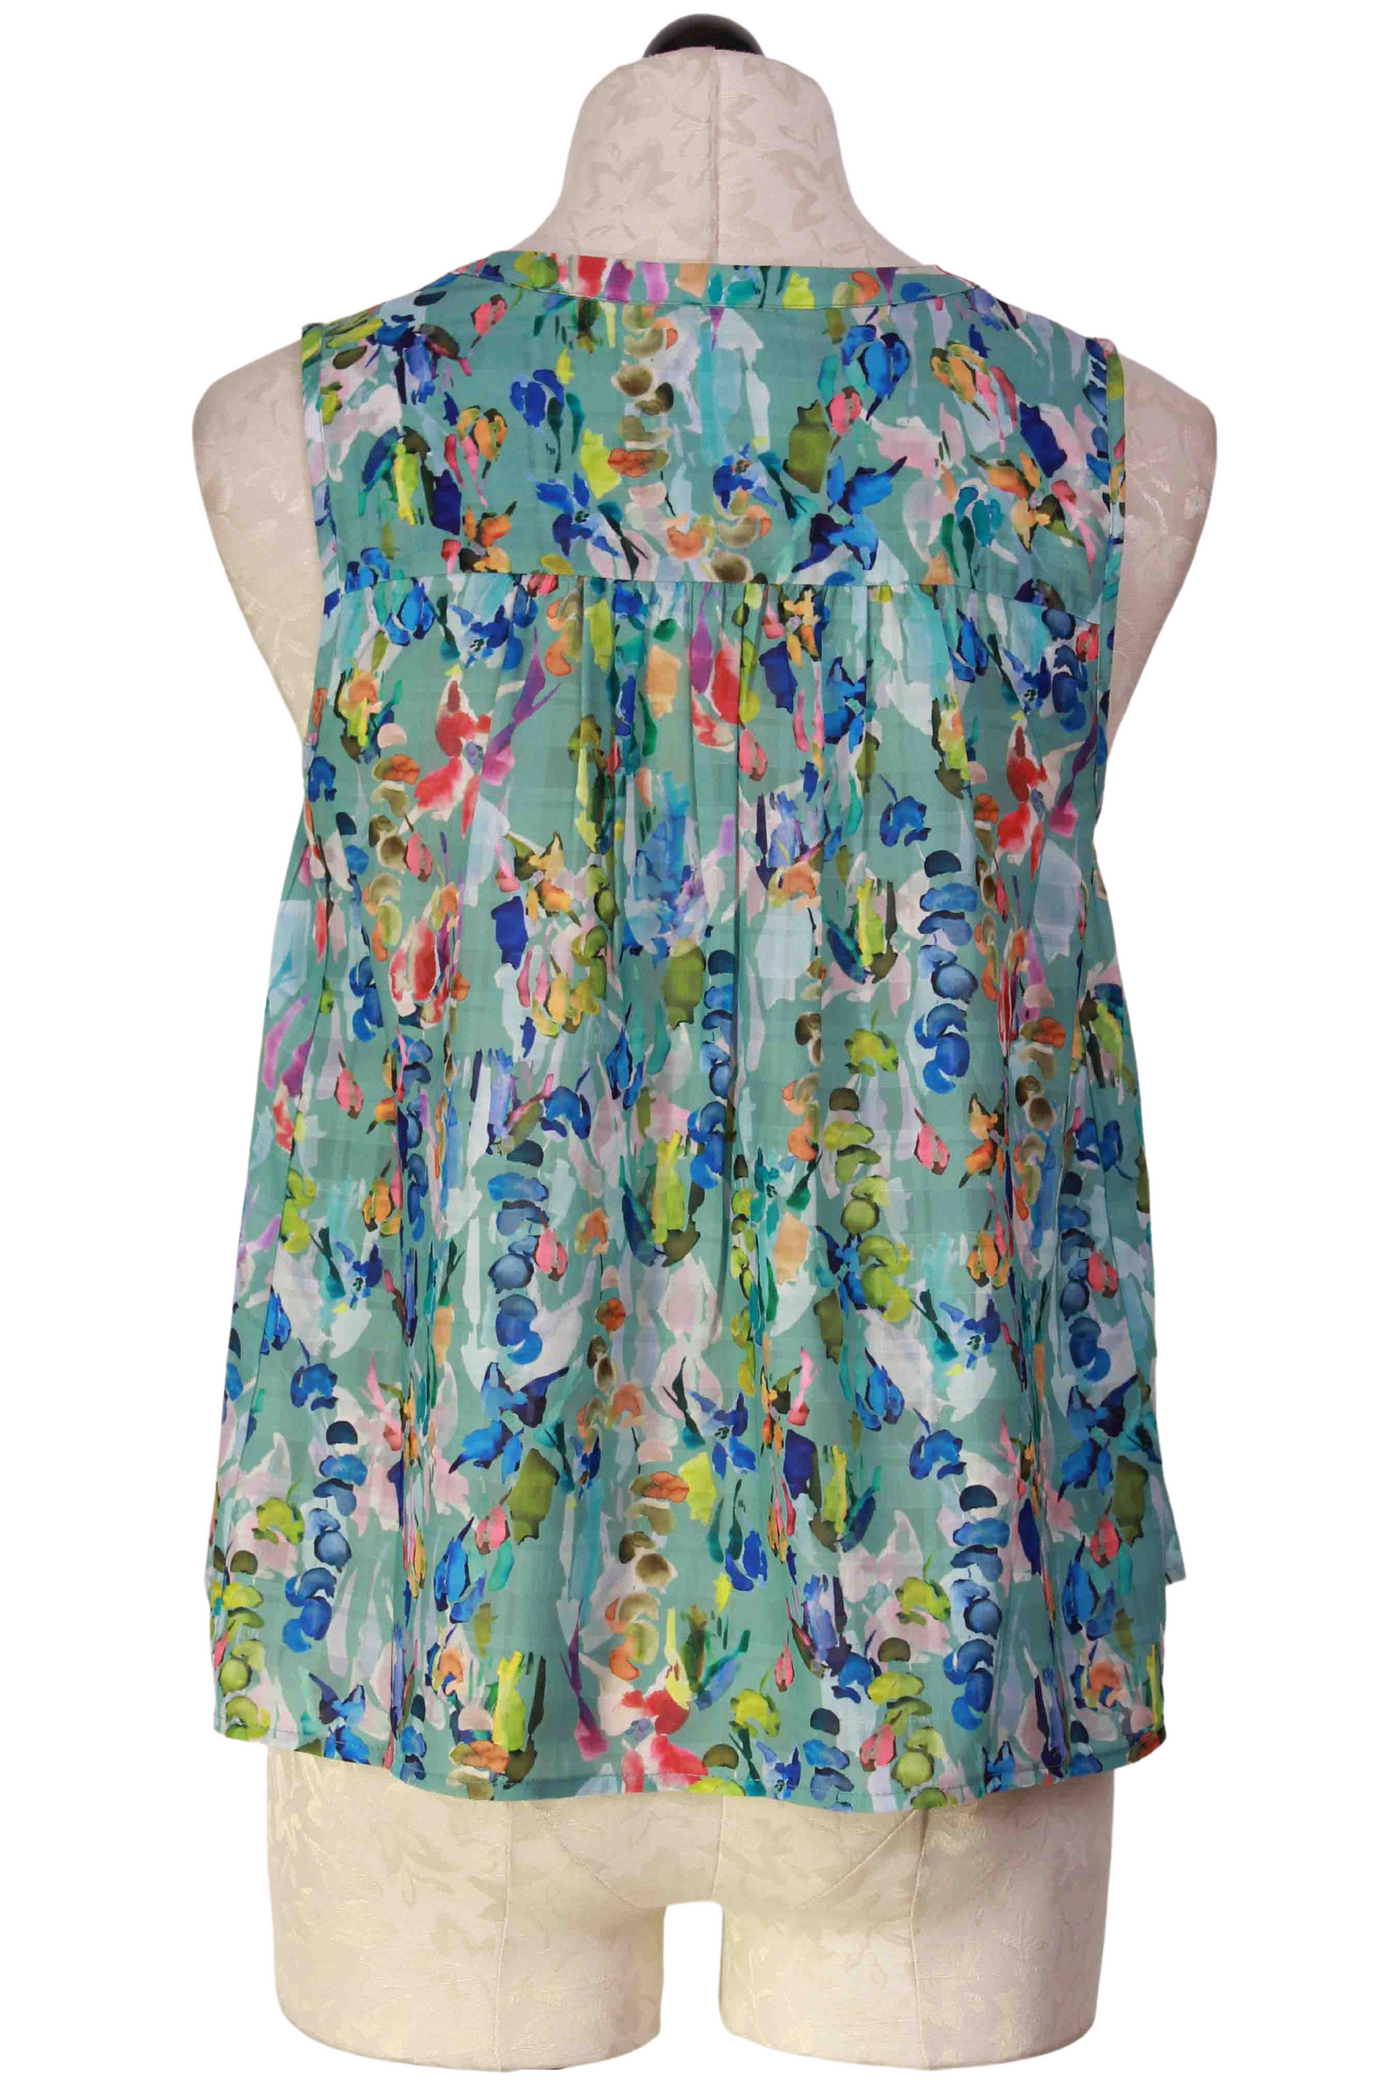 back view of Sleeveless Peplum Bottom Floral Blue/Multicolor Blouse by The Korner